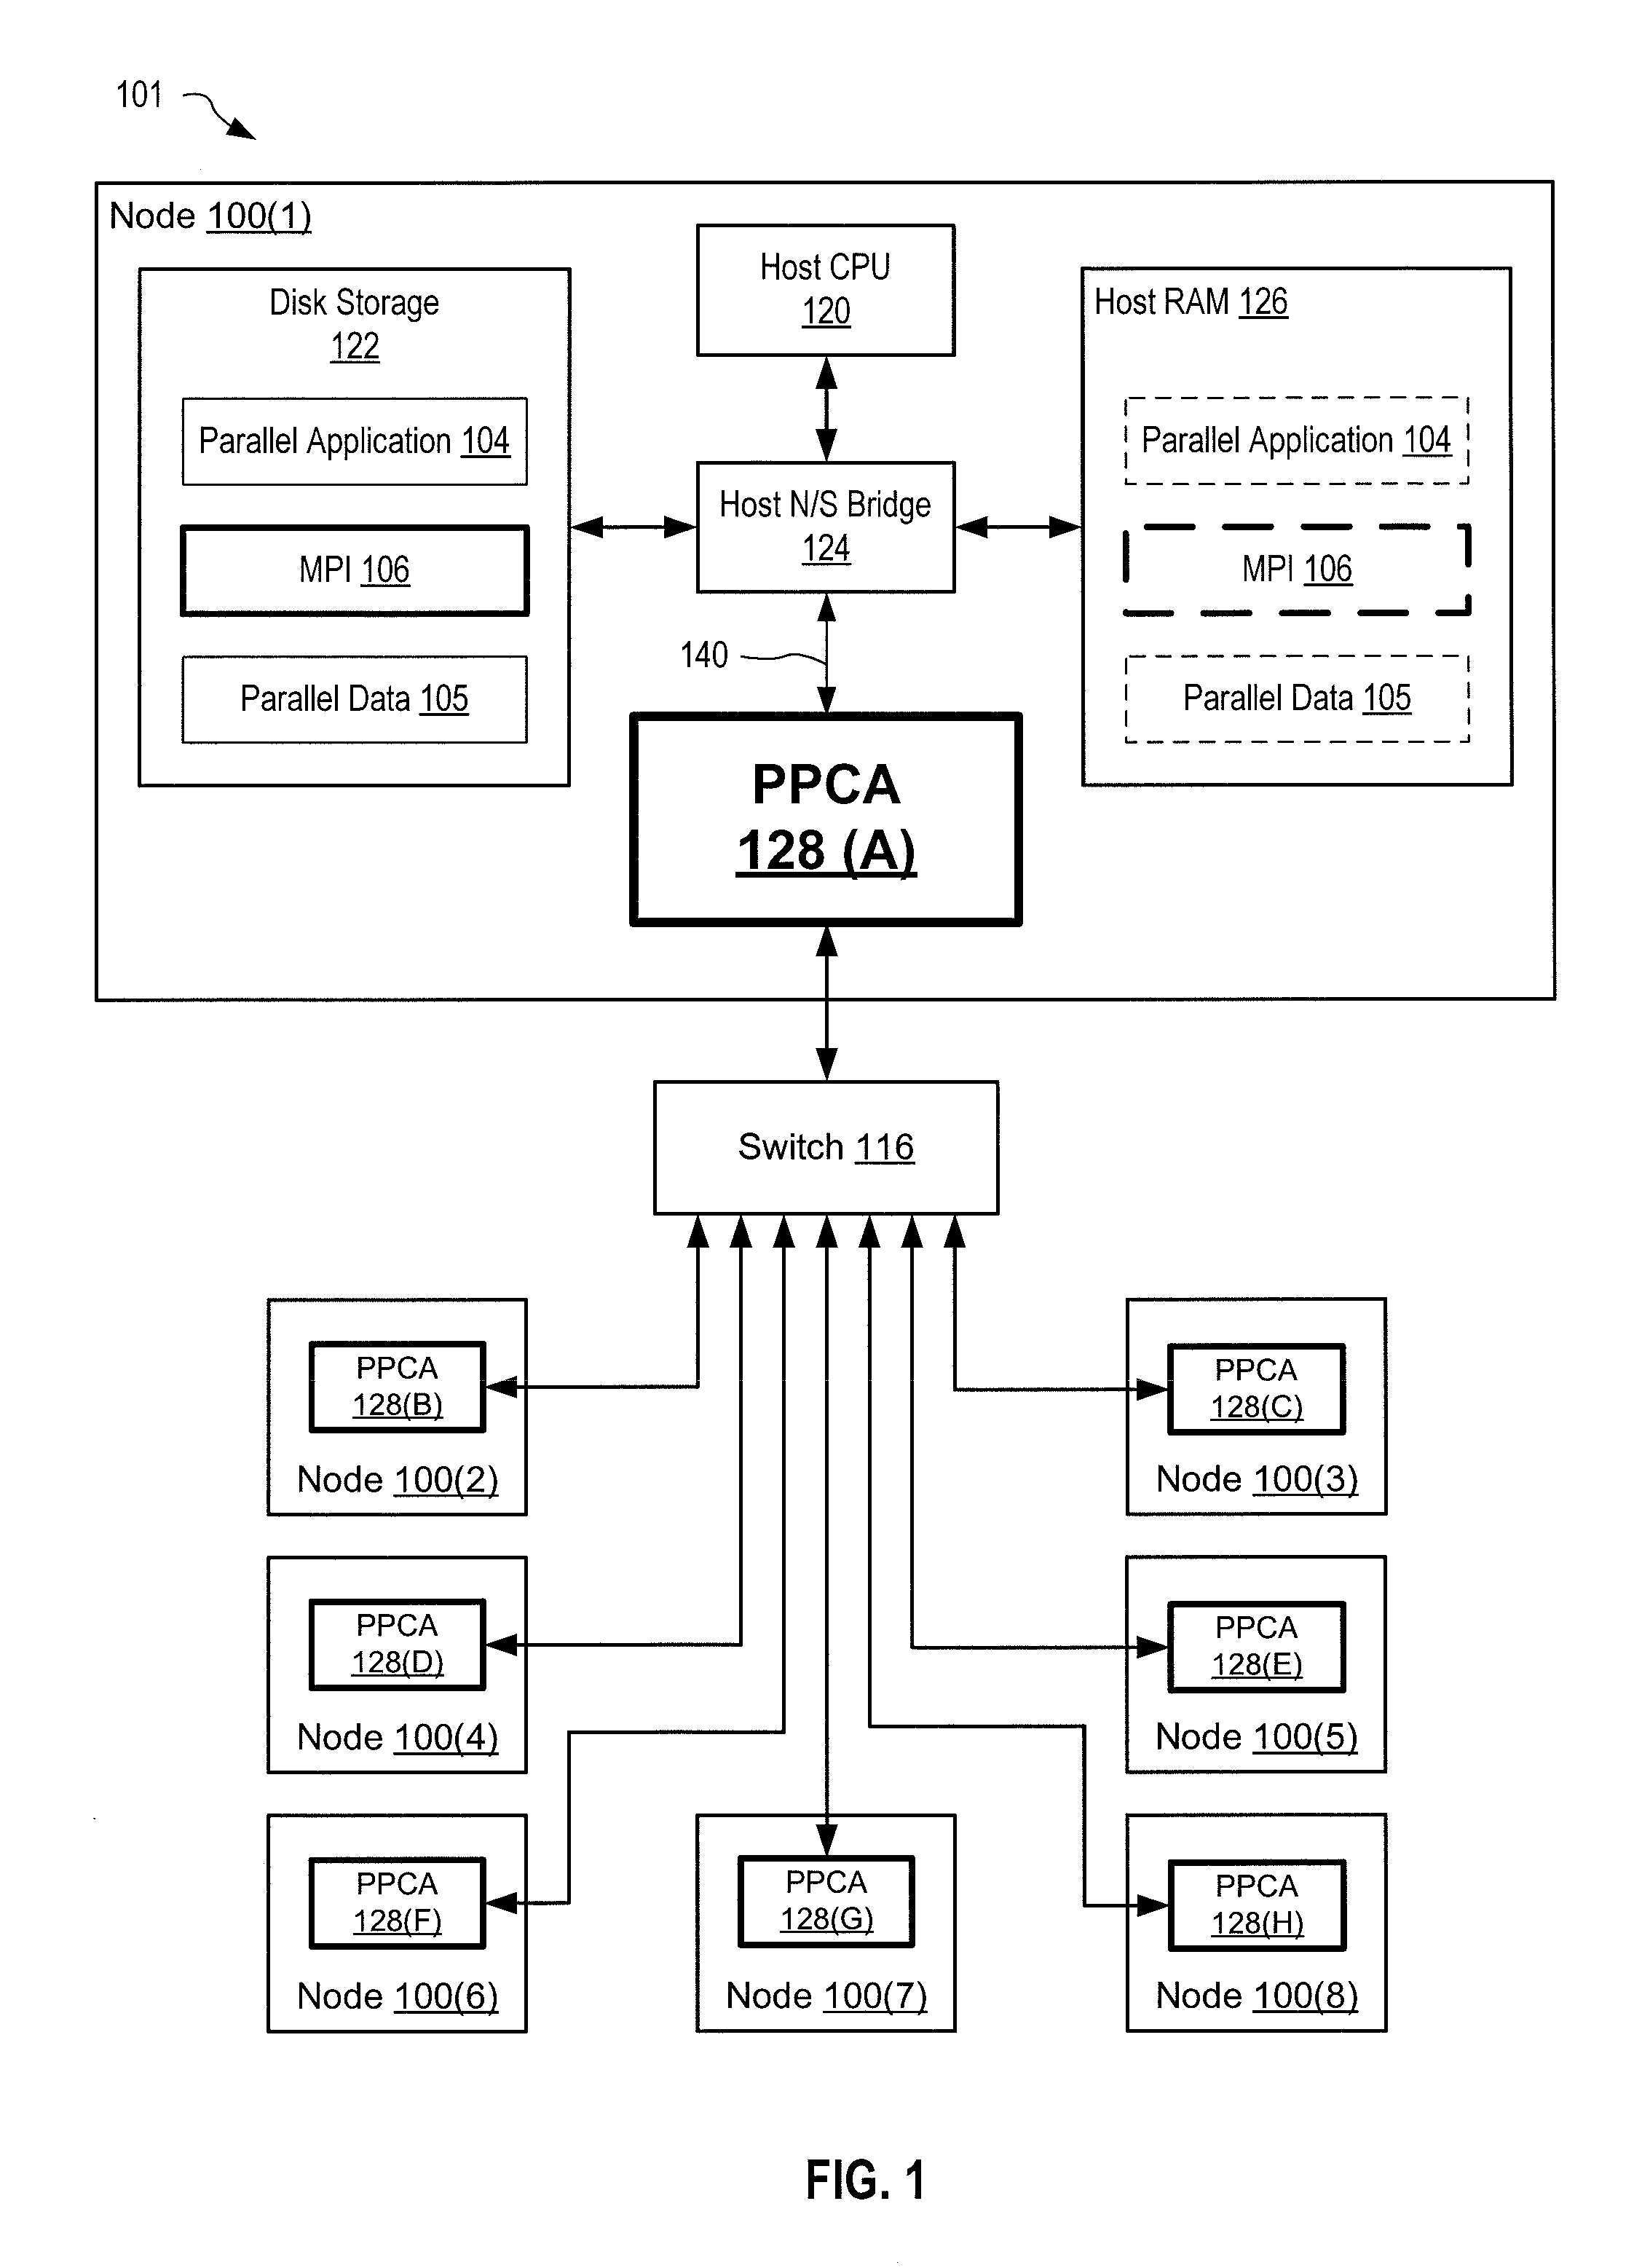 Apparatus for enhancing performance of a parallel processing environment, and associated methods